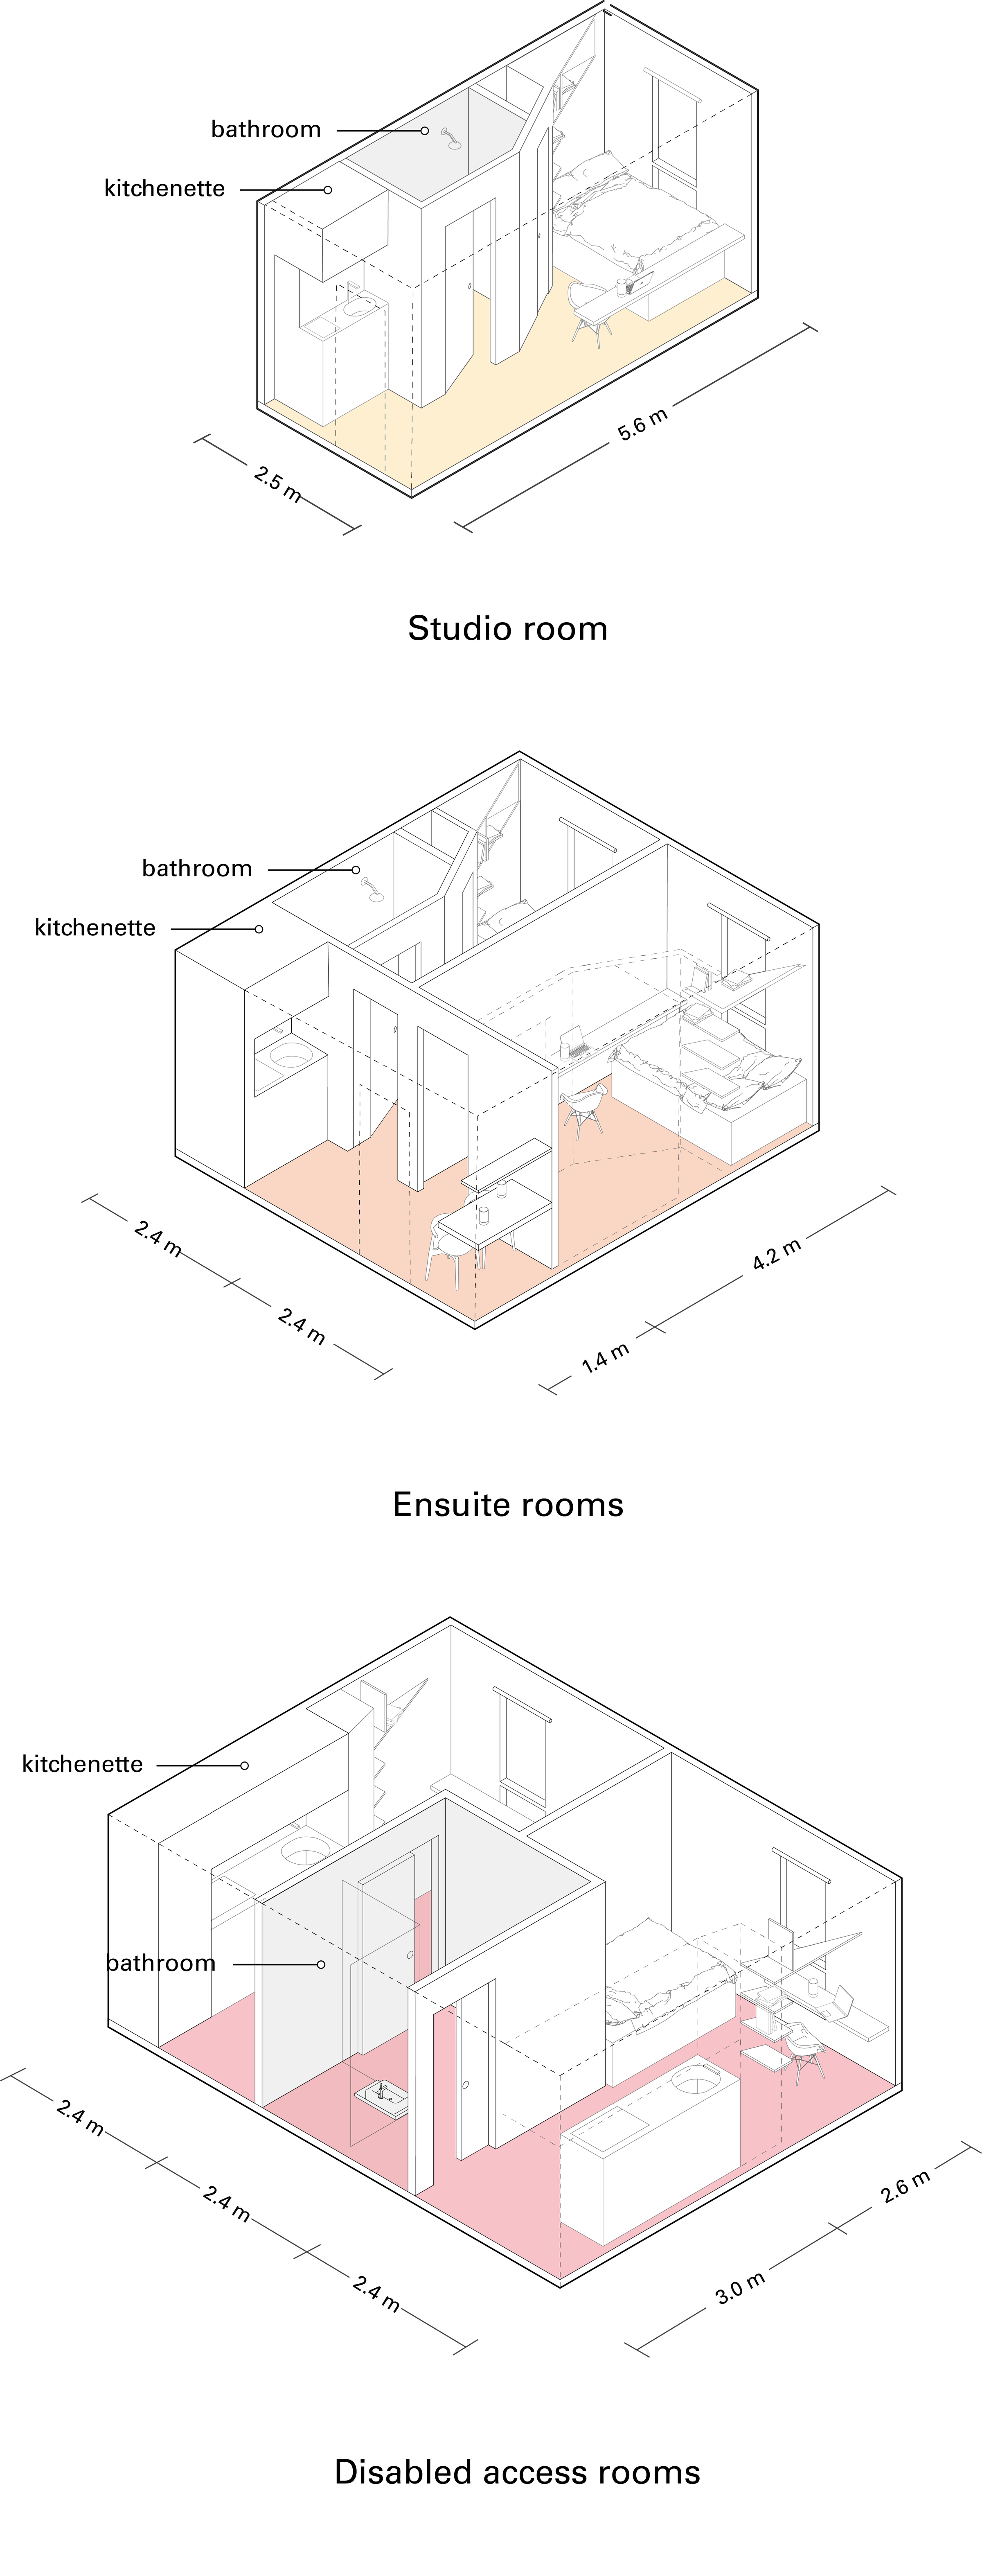 Three individual 3D models of a studio room, ensuite room and disabled access room with kitchens, bathrooms and overall measurements labelled